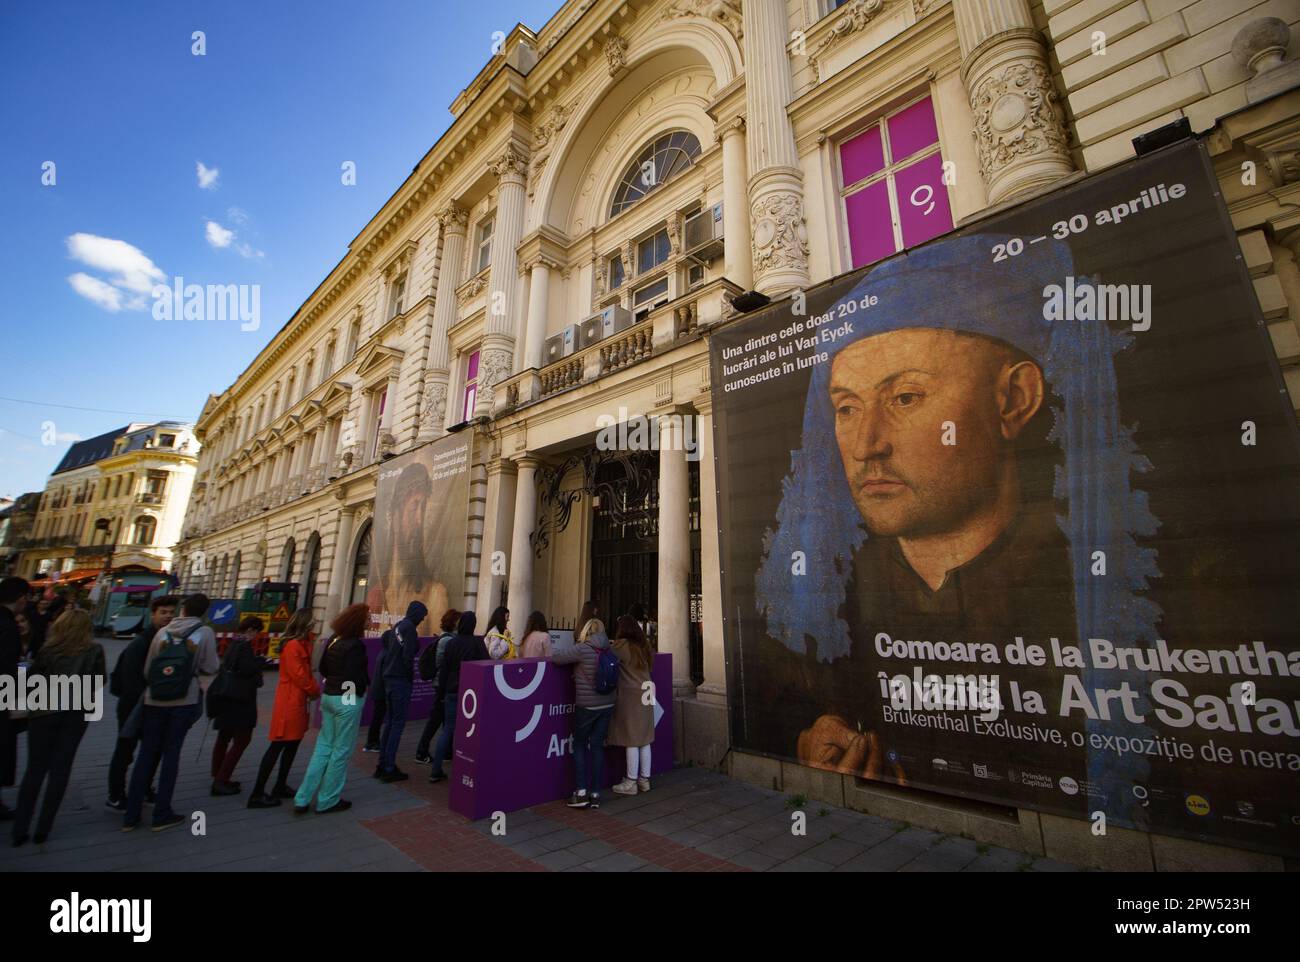 Bucharest, Romania. 28th Apr, 2023: People queue in line in front of Dacia Palace where Art Safari Bucharest and Brukenthal National Museum exhibit the paintings Portrait of a Man with a Blue Chaperon by Jan van Eyck and Ecce Homo by Tiziano Vecelli, the only painting by Titian that Romania owns, stolen in 1968 and recovered after 30 years in 1998. Credit: Lucian Alecu/Alamy Live News Stock Photo